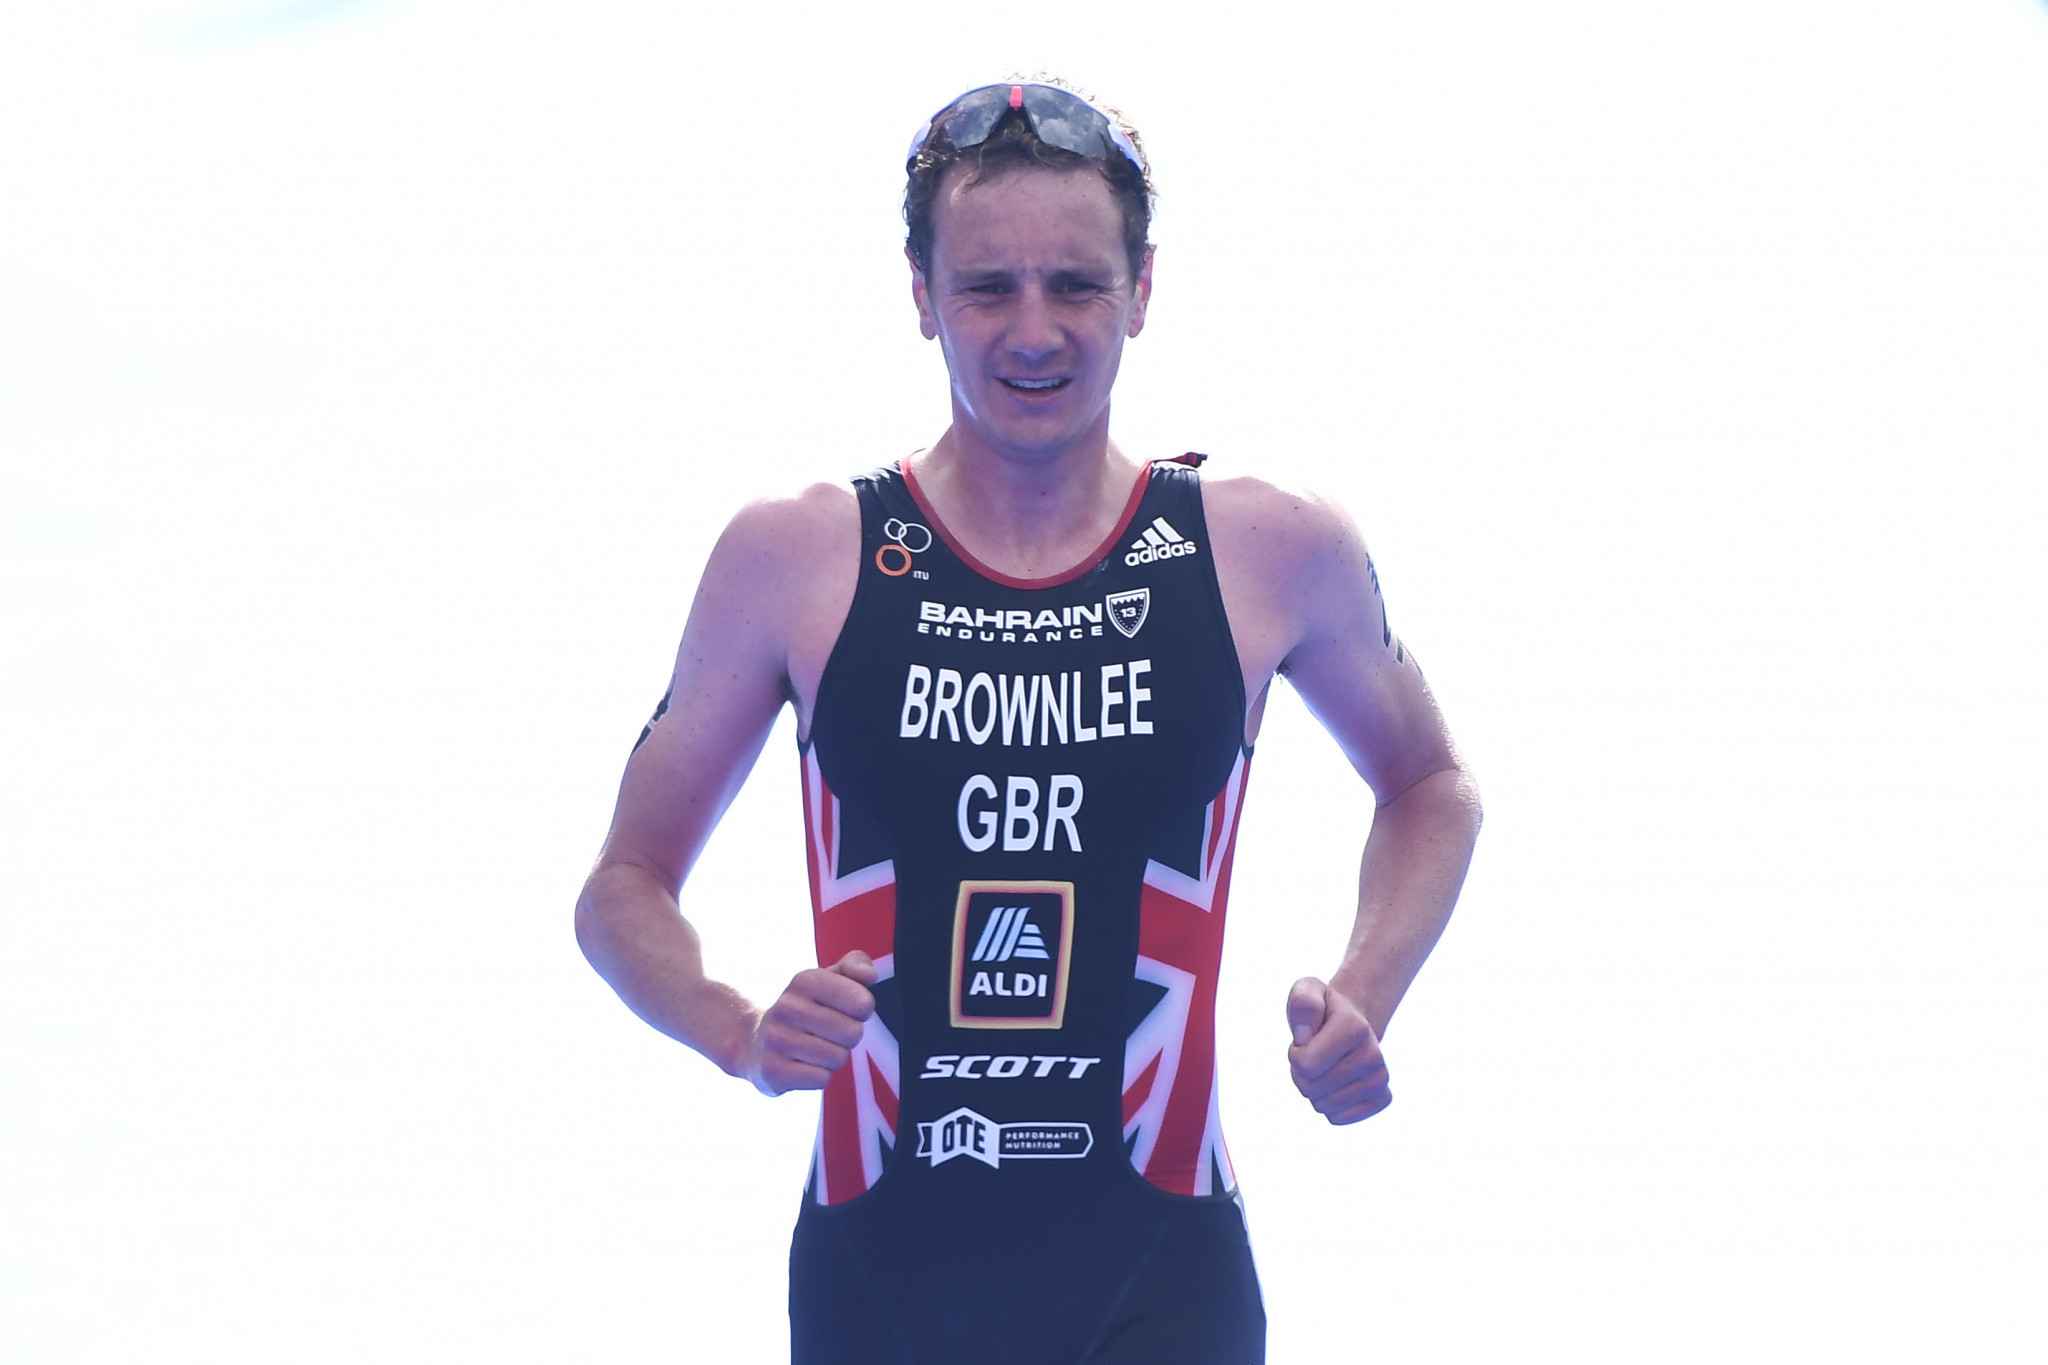 Alistair Brownlee targets "equality and fairness" if elected to IOC Athletes' Commission